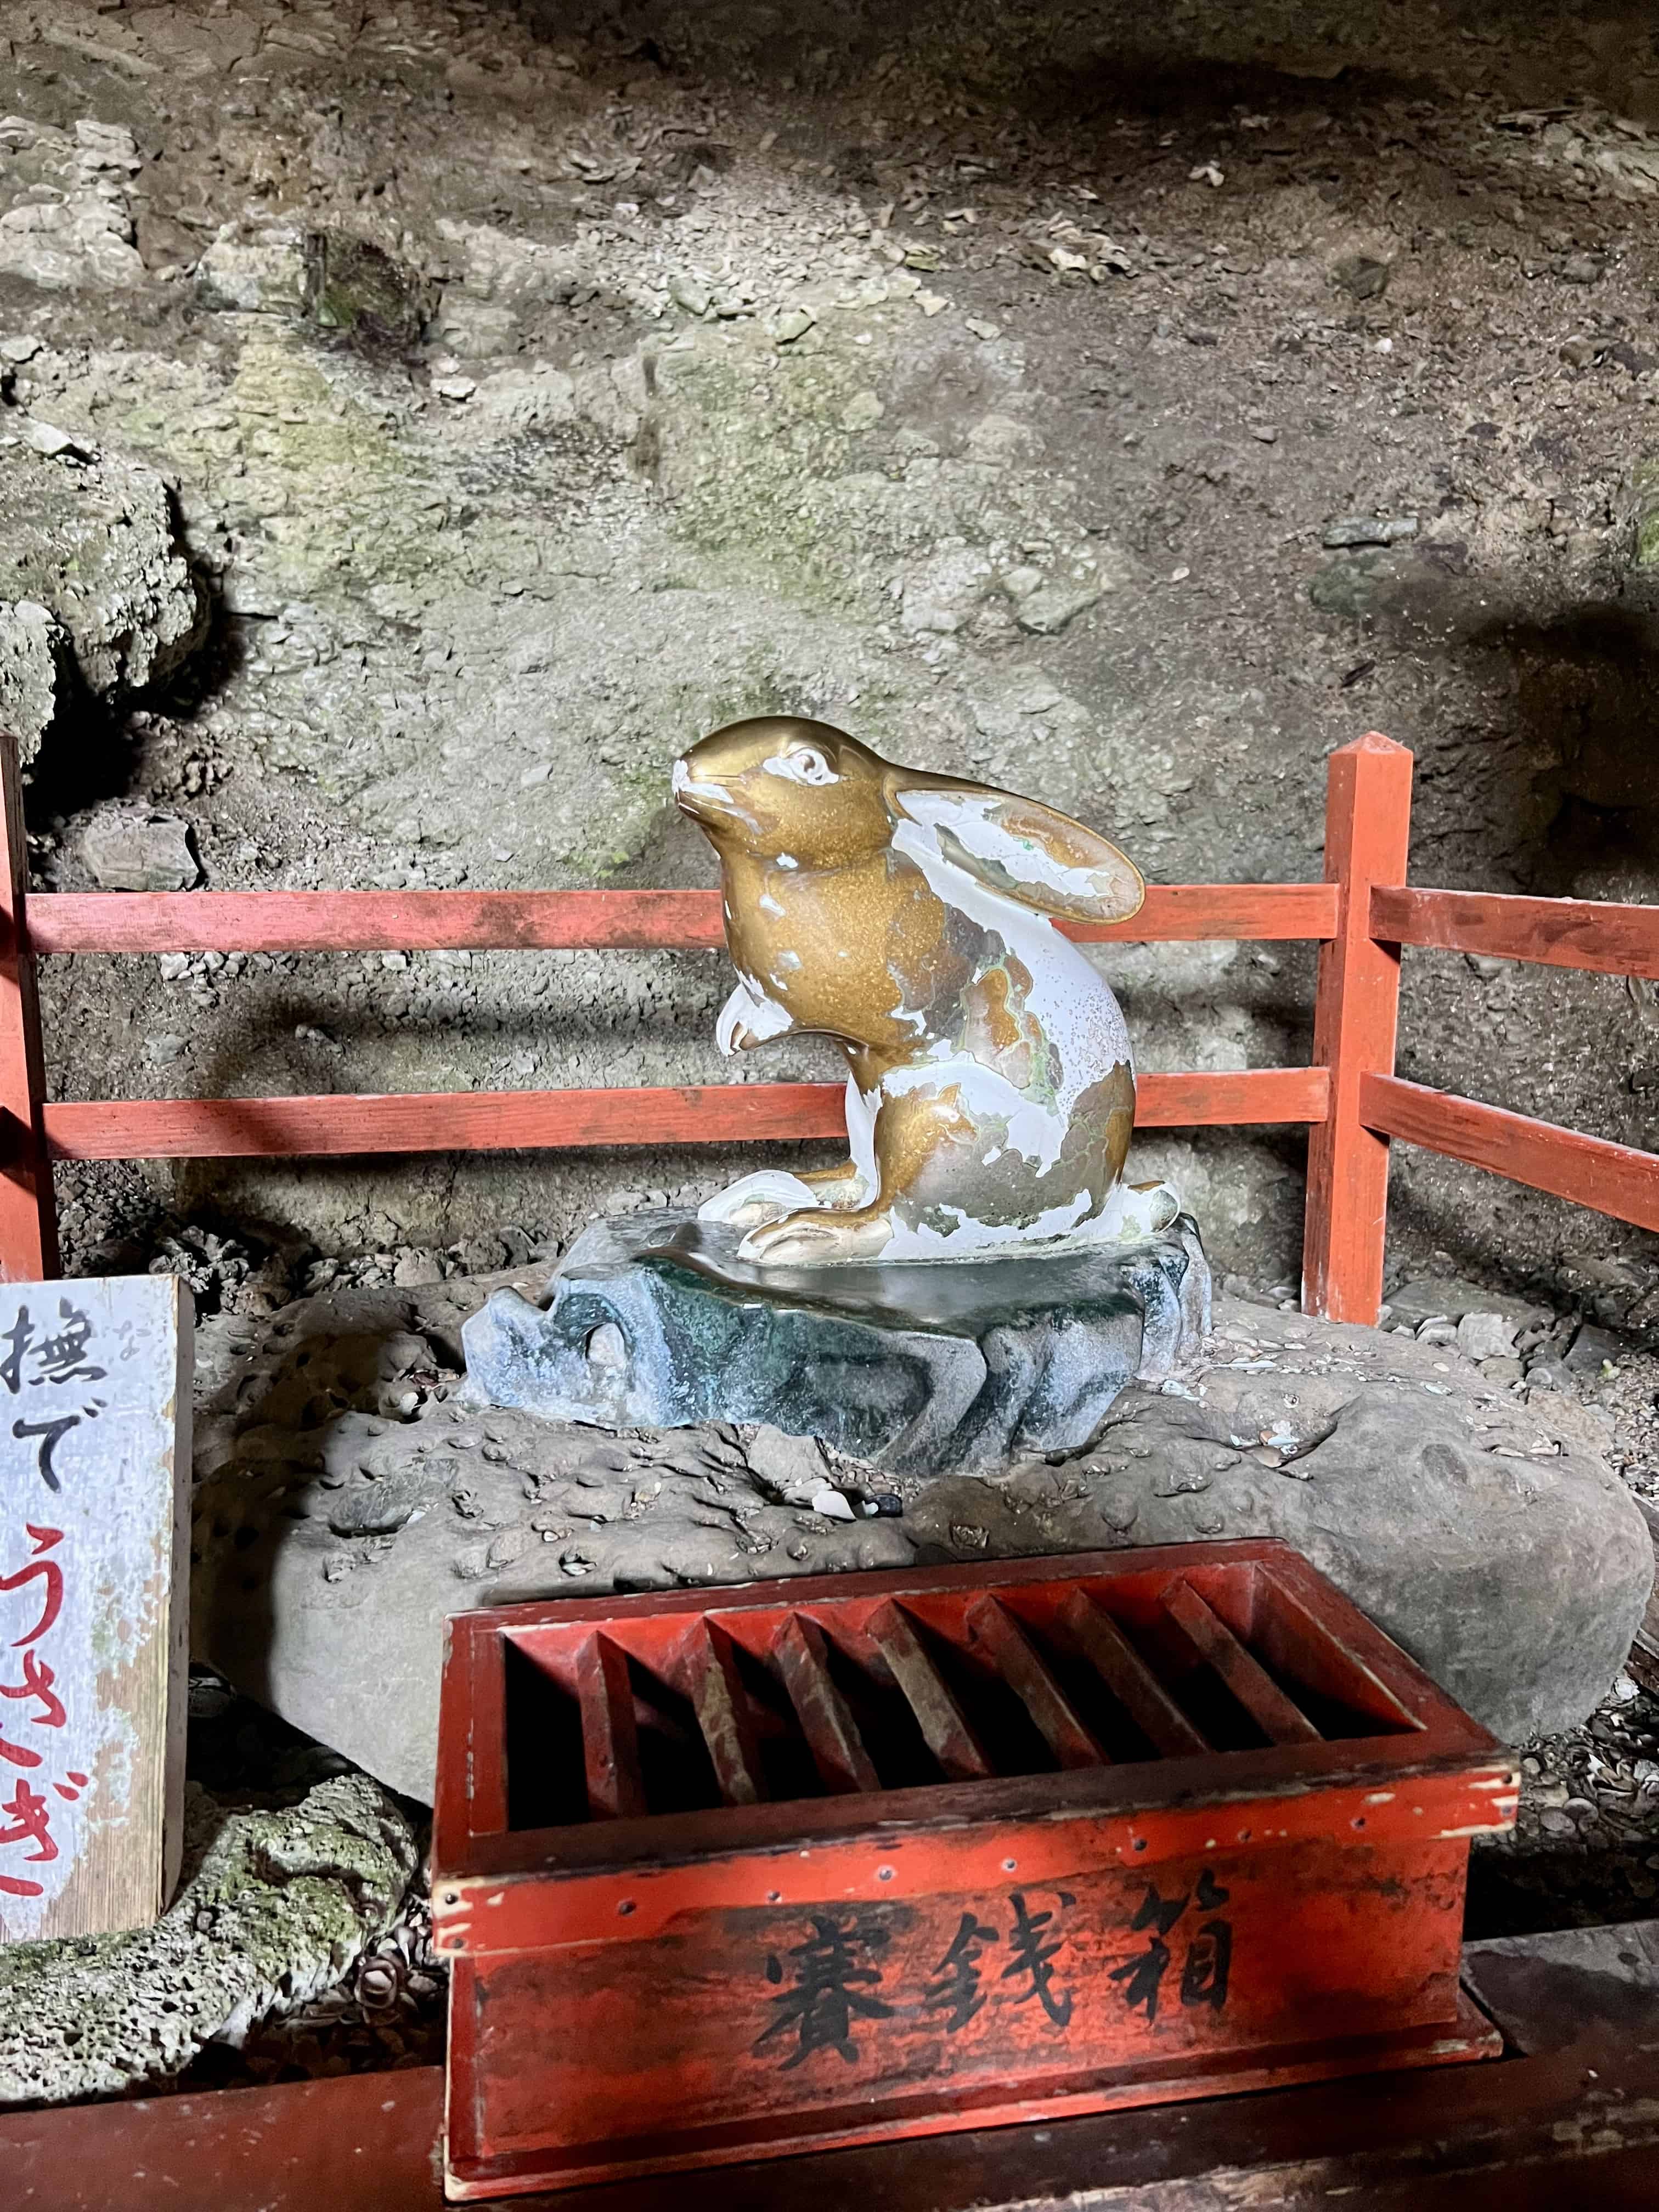 Nade Usagi rabbit statue within the cave at Udo Shrine.